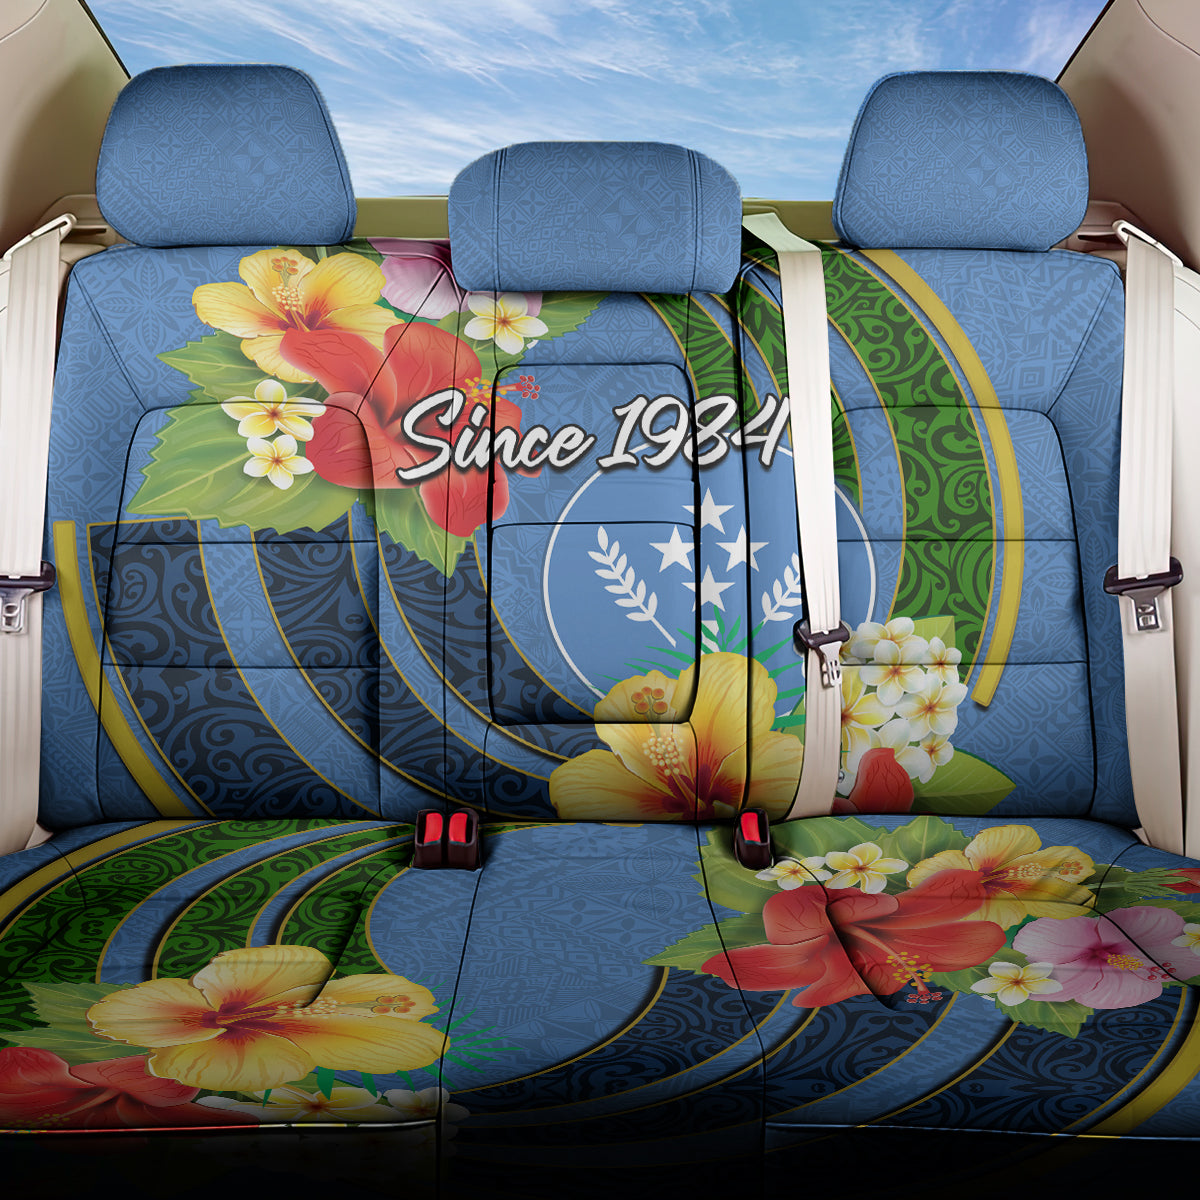 Kosrae Constitution Day Back Car Seat Cover Hibiscus Mix Maori Tattoo Pattern LT03